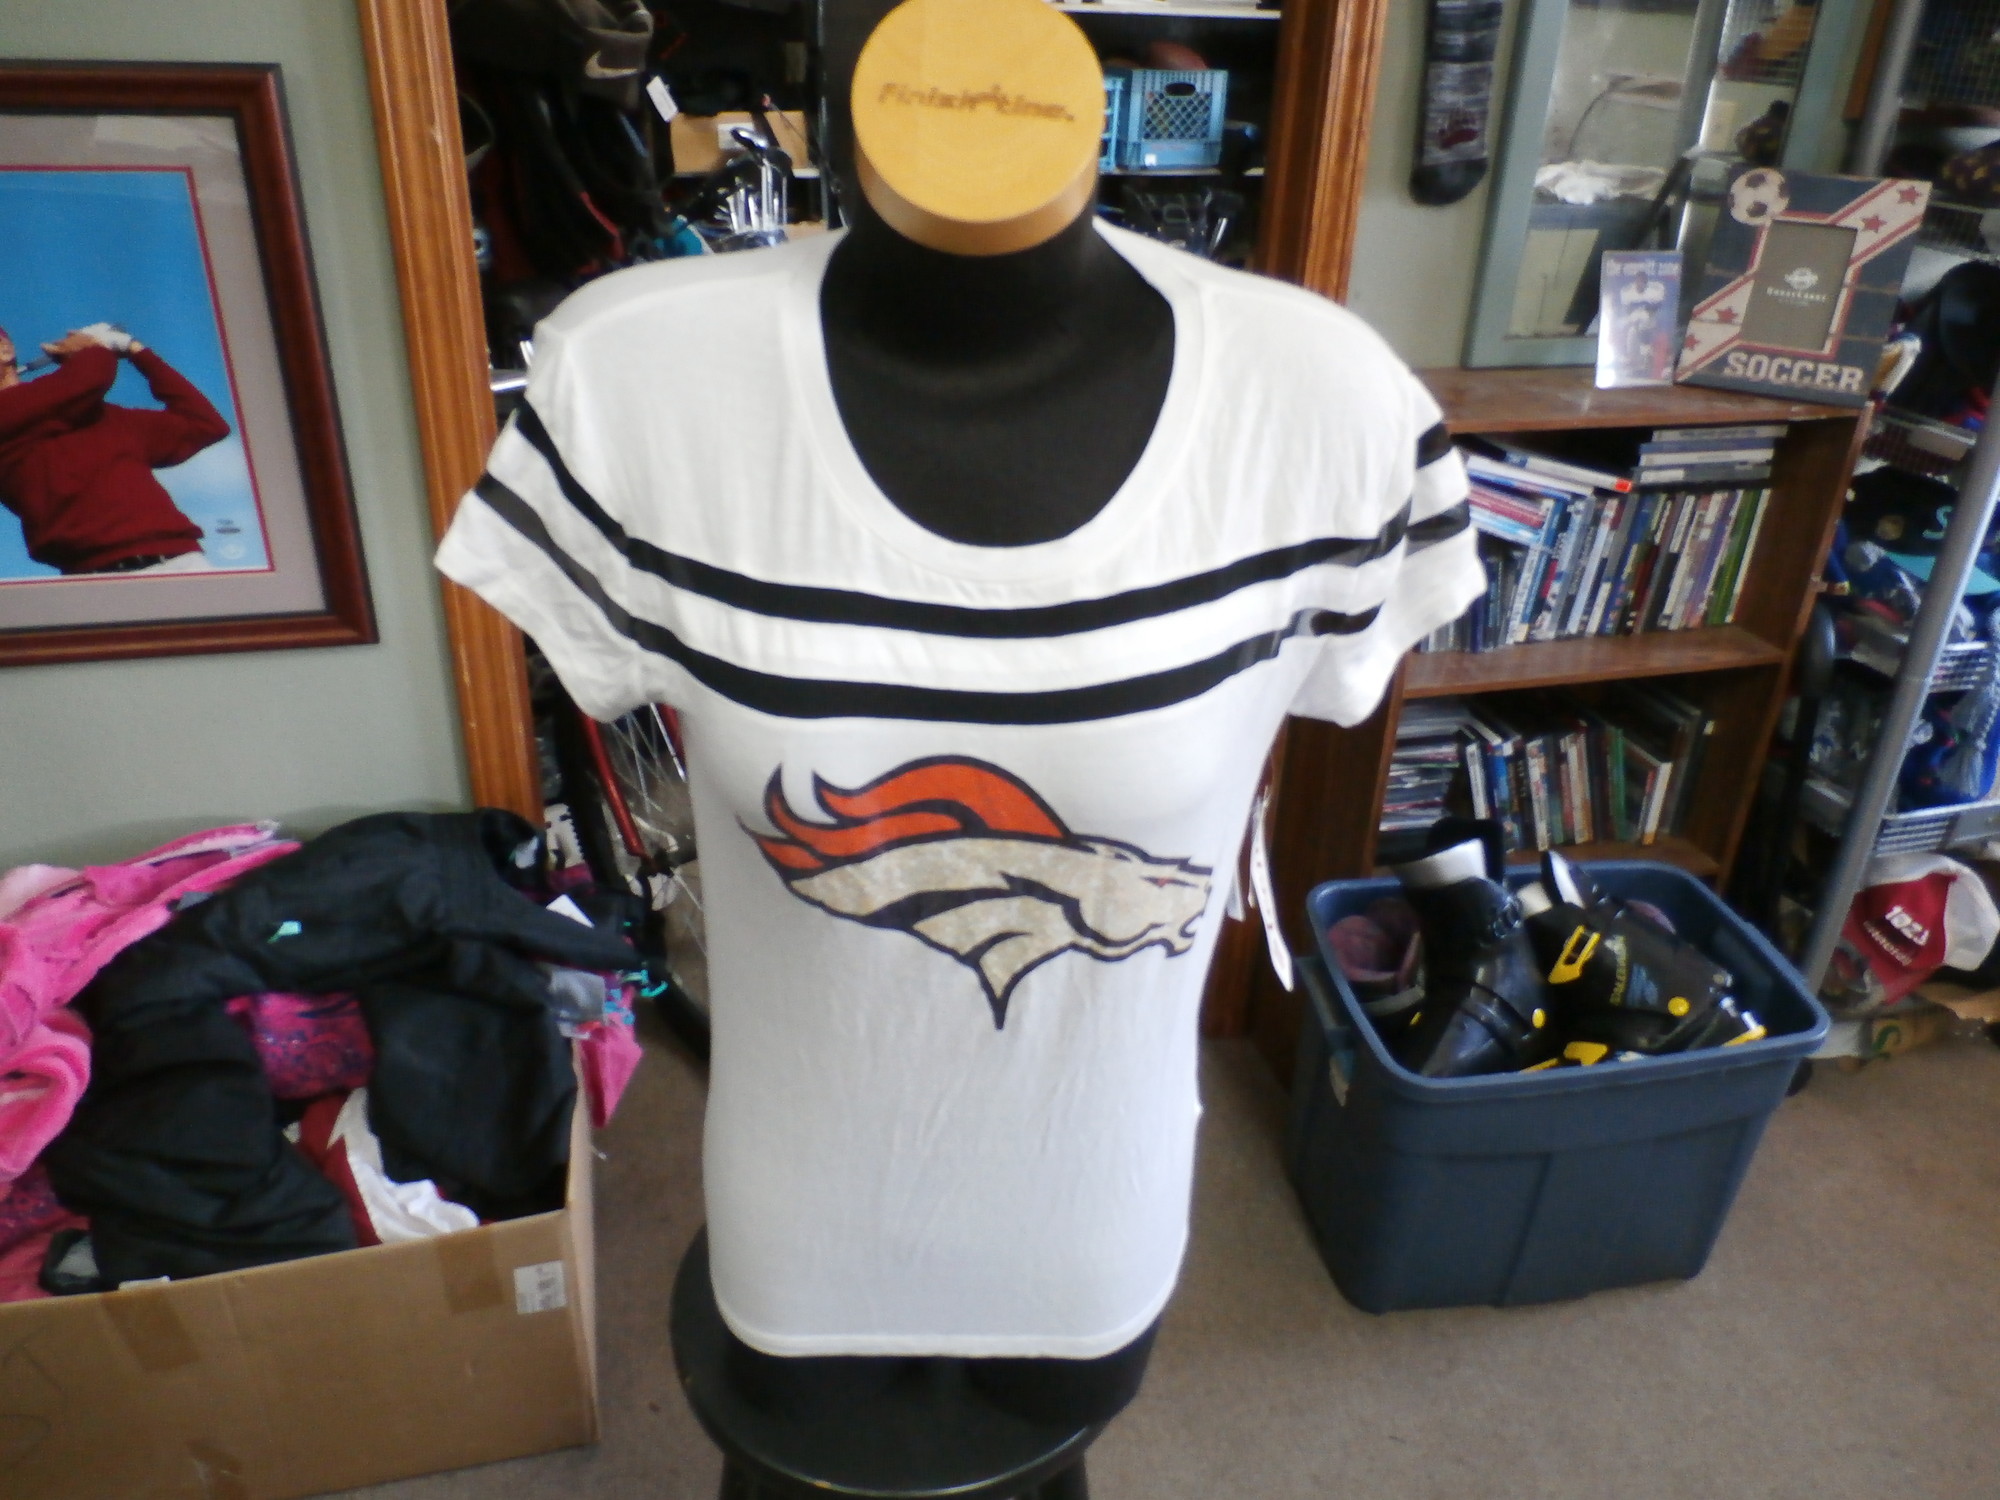 Denver Broncos white NFL Teens girl's shirt white size M rayon blend #34595
Rating: (see below) 1- Excellent Condition
Team: Denver Broncos
Player: n/a
Brand: NFL Teens
Size : Girl's YOUTH Medium- (Measures Chest 18\" ; Length 24\") armpit to armpit; shoulder to hem
Color: white
Style: short sleeve; sparkly screen printed
Material: 95% rayon 5% spandex
Condition: 1- Excellent Condition: like new with original tags still attached (see photos)
Item #: 34595
Shipping: FREE